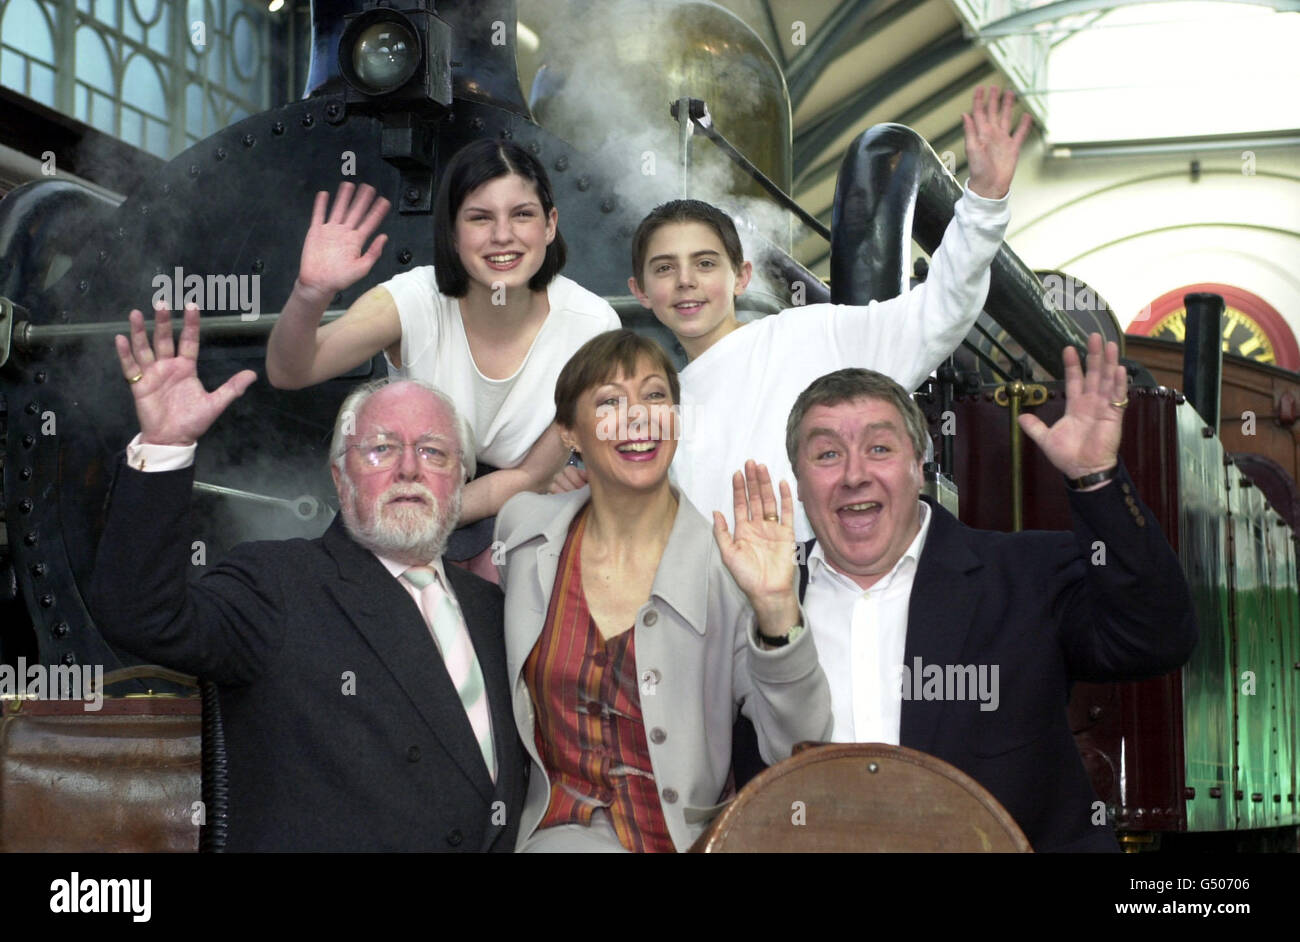 Stars of the forthcoming adaptation of The Railway Children gathered at London's Transport Museum. (L to R) Richard Attenborough as The Old Gentleman, Jemima Rooper as Roberta, Jenny Agutter as Mother, Jack Blumenau as Peter, and Gregor Fisher as Perks. Stock Photo